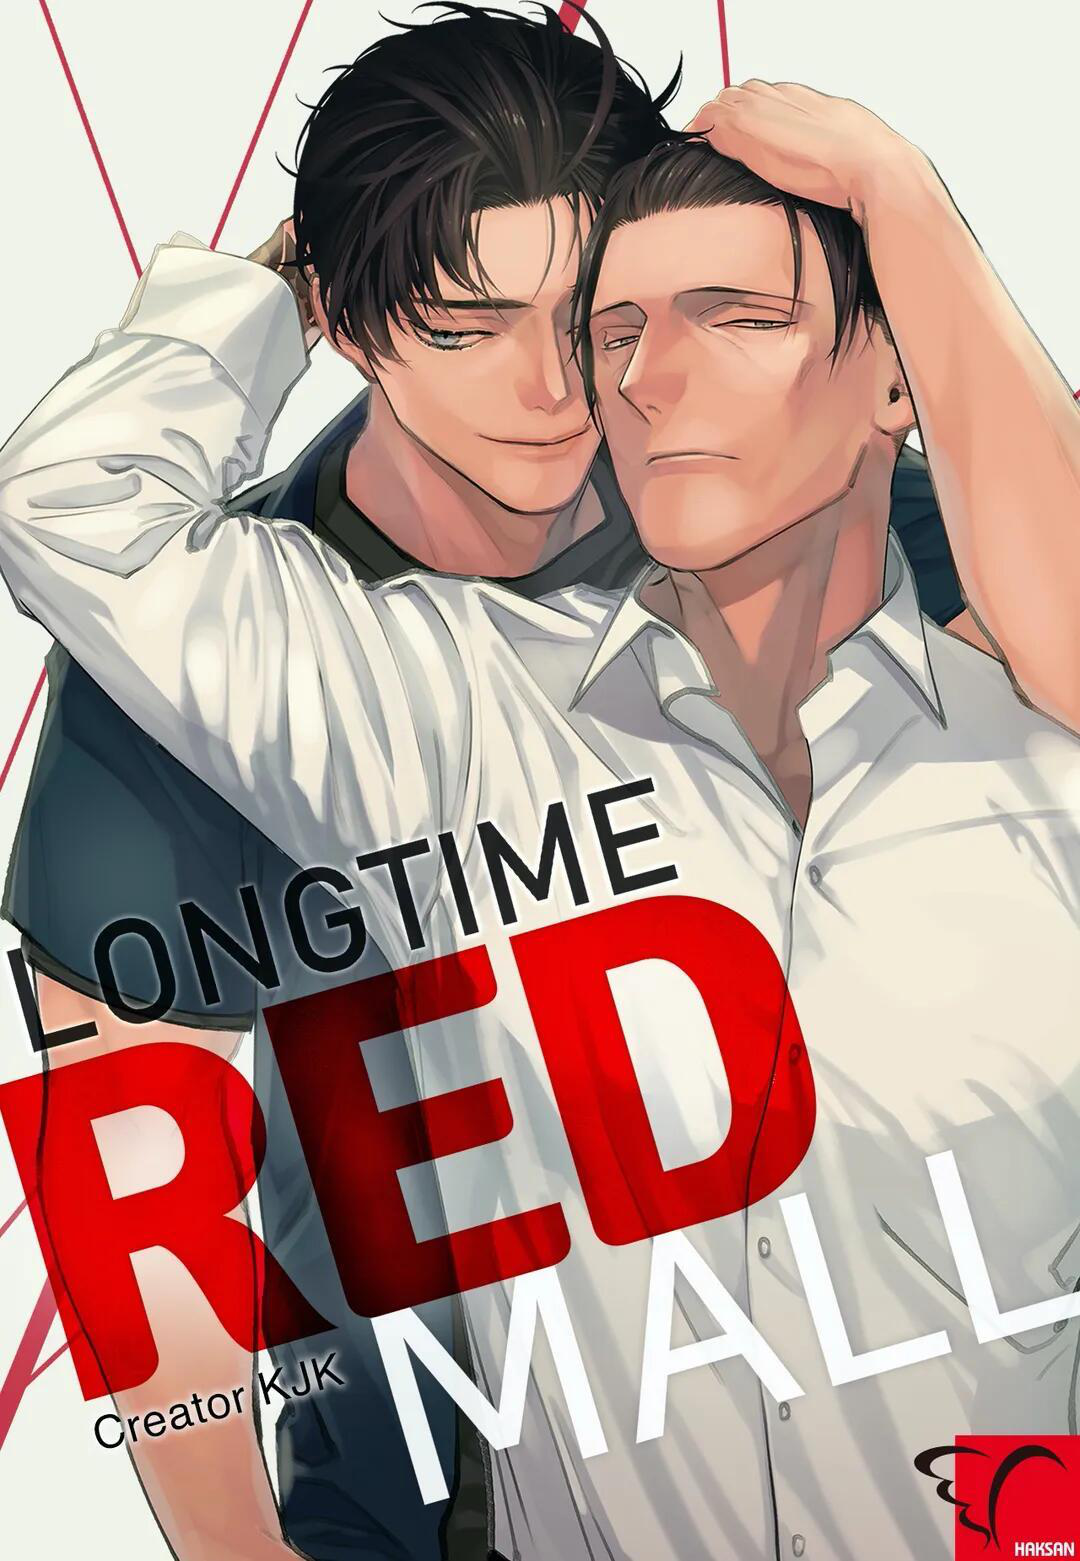 Long Time Red Mall - chapter 35 - #2